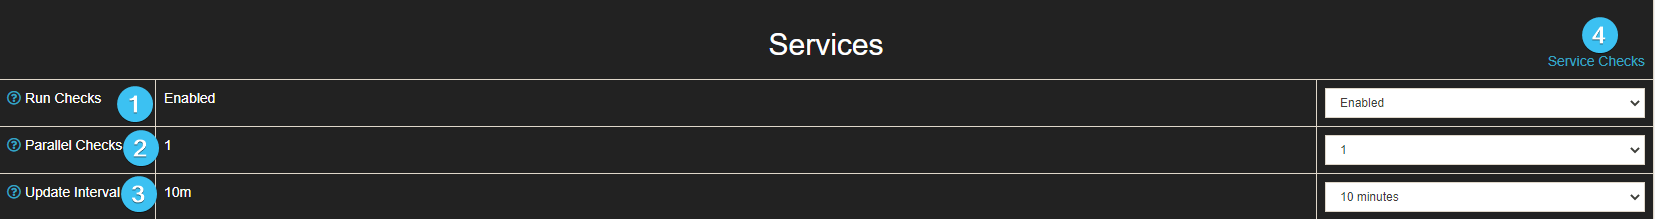 services.png